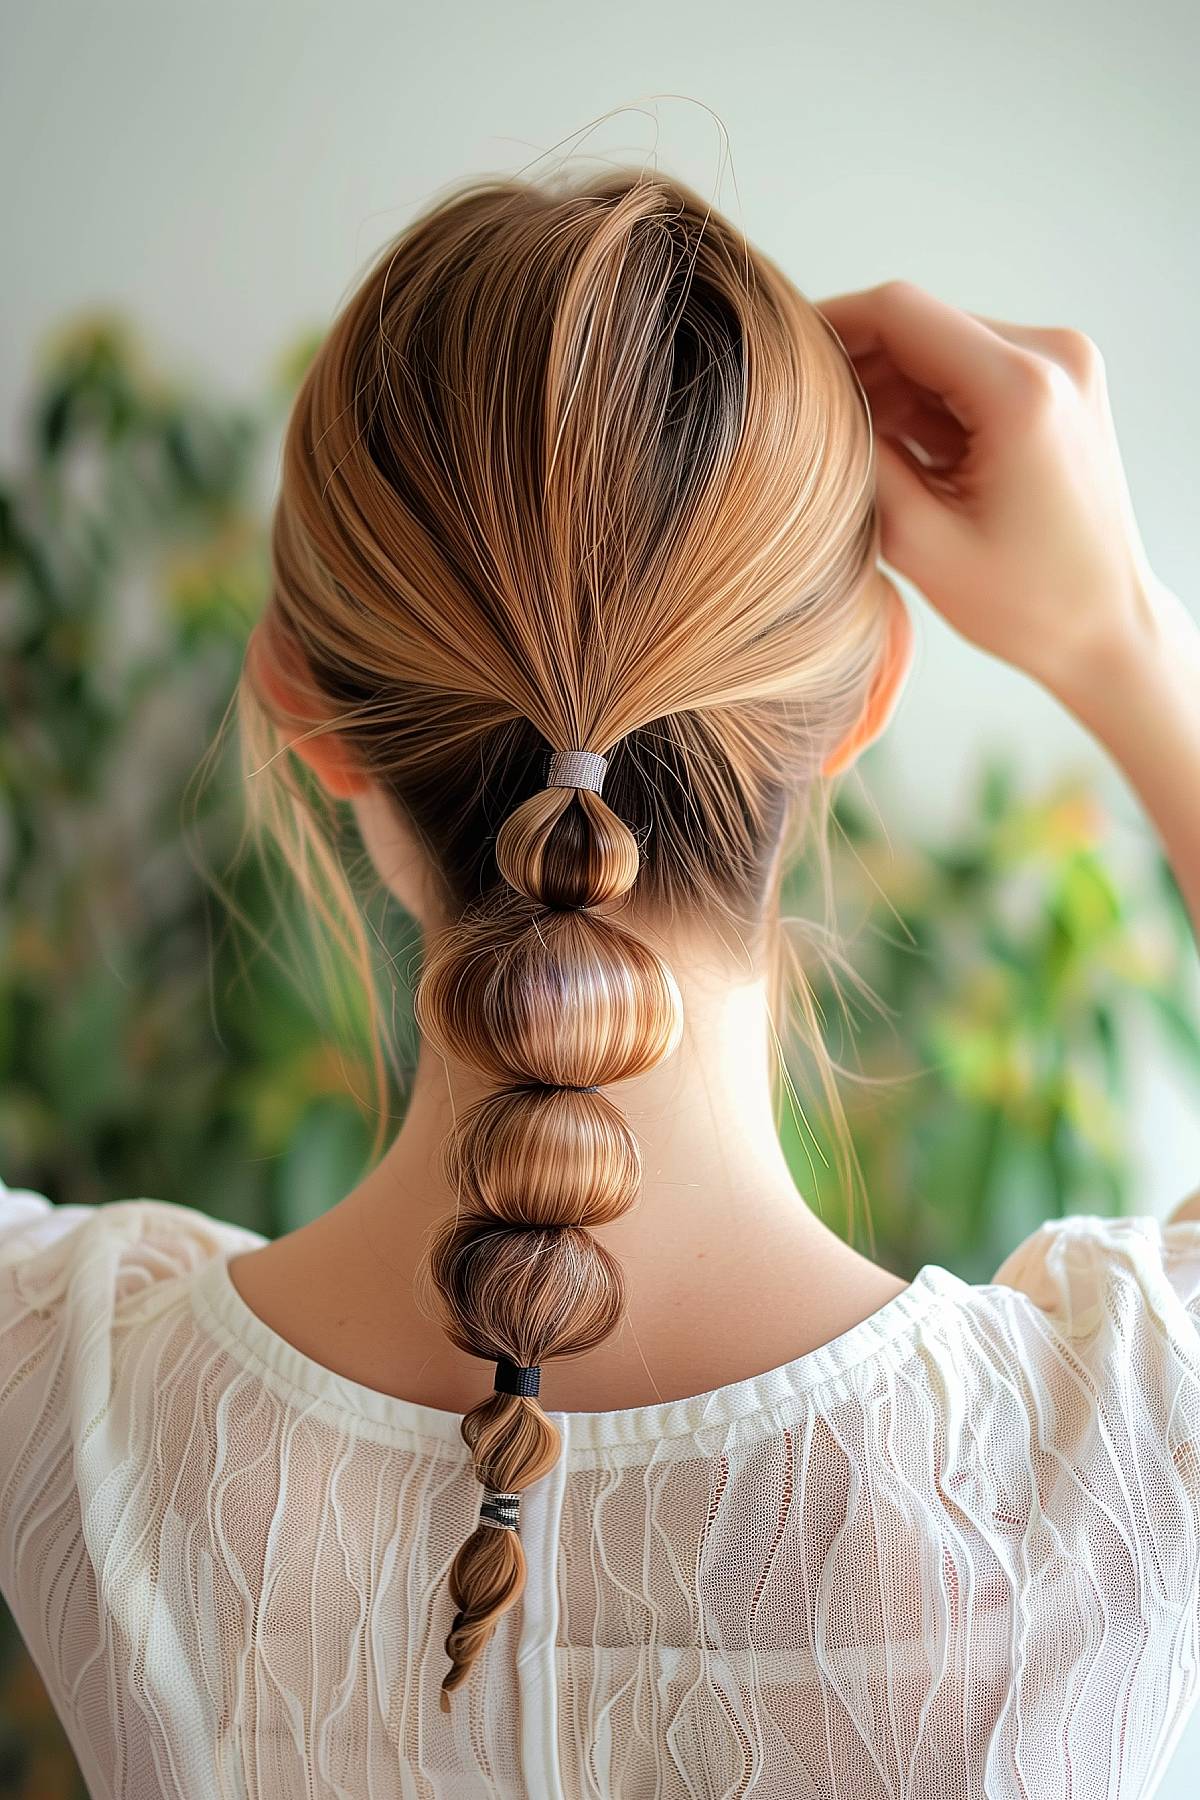 Medium-length hair styled into a bubble braid, offering a chic and simple alternative to a traditional ponytail.